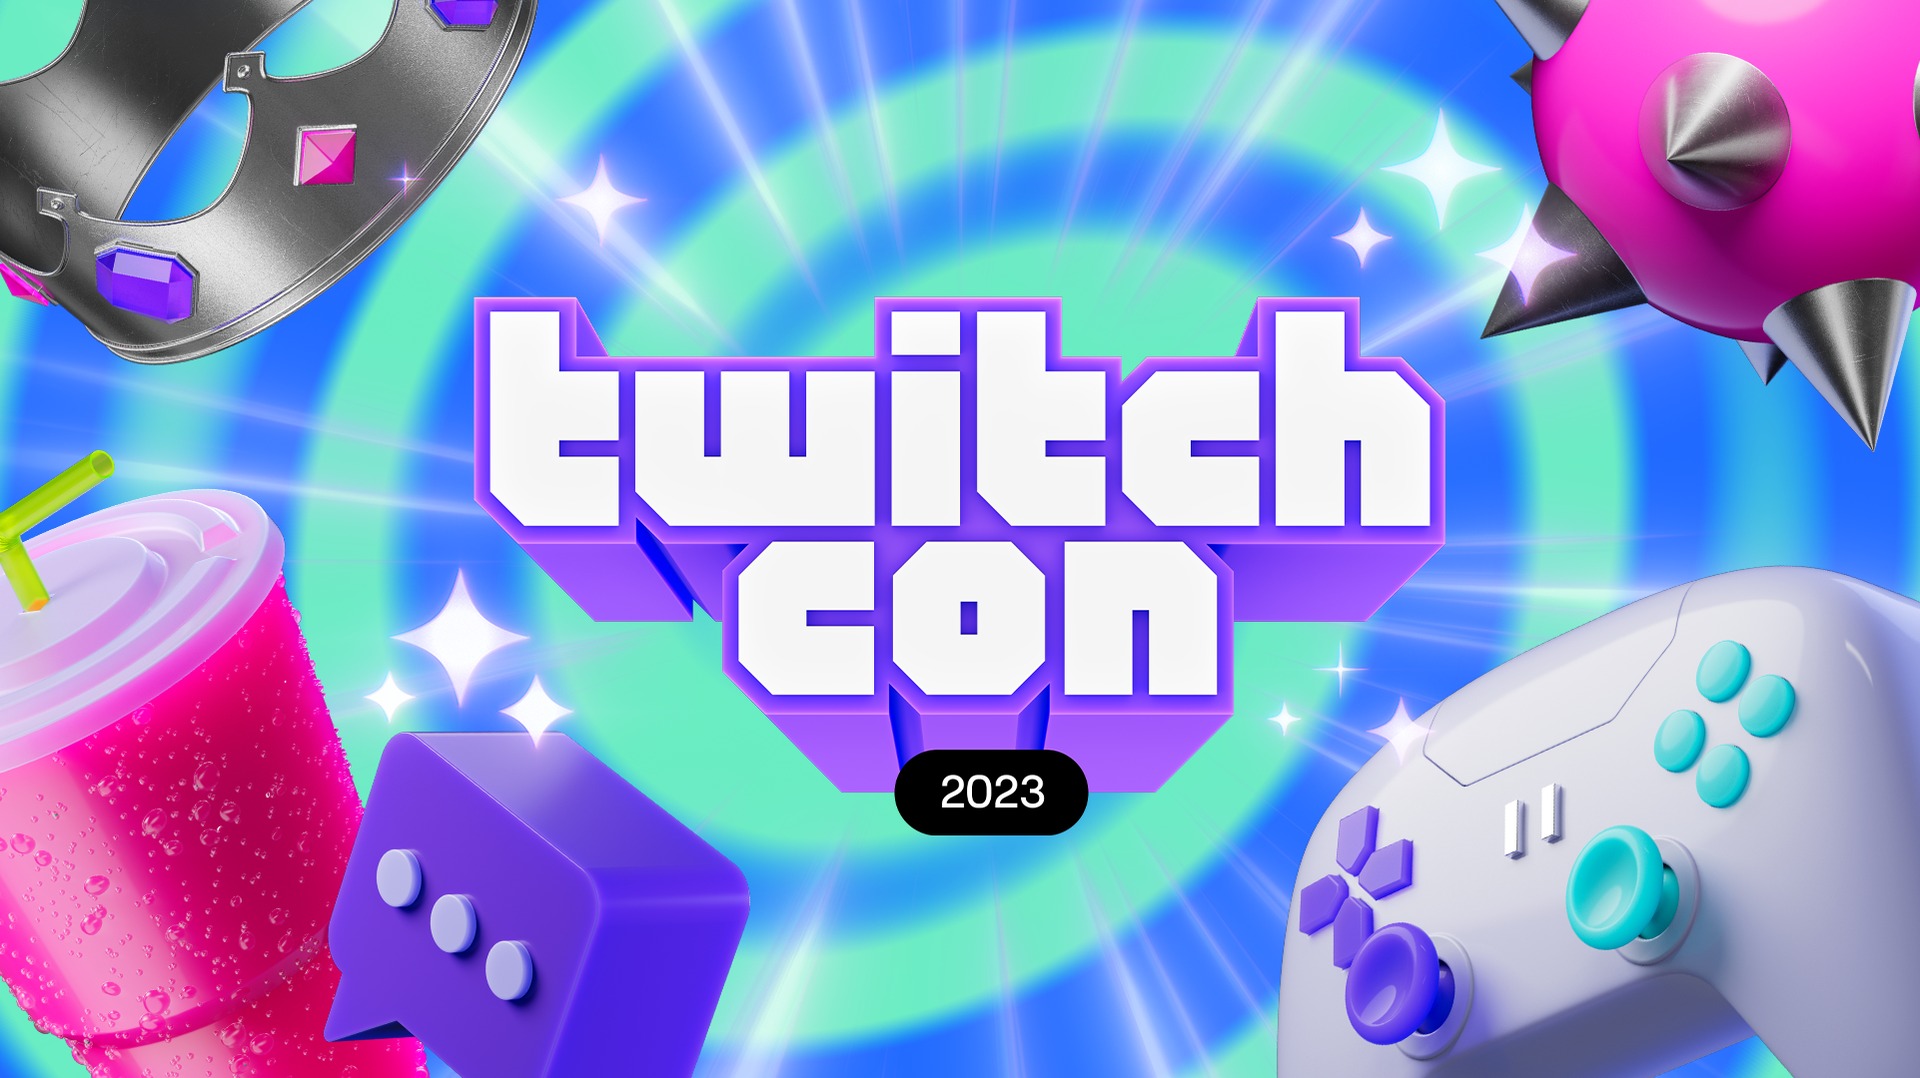 TwitchCon 2023 to be held at two new and exciting locations ONE Esports